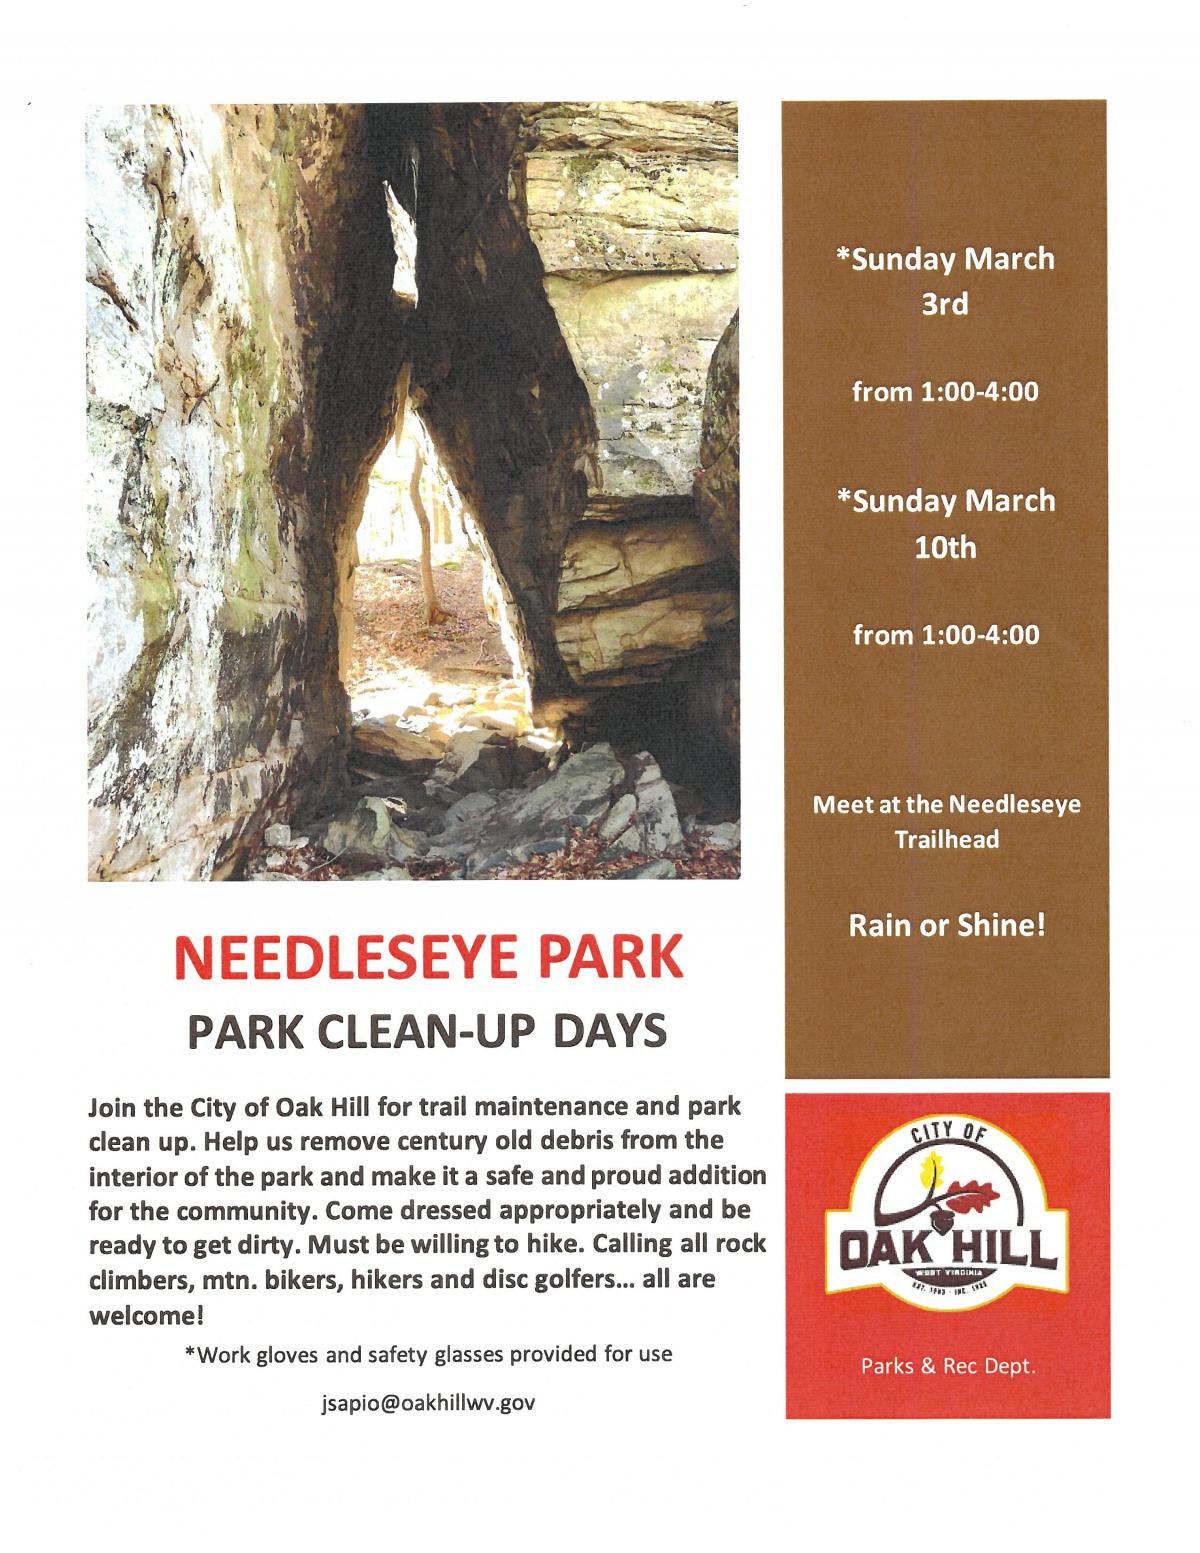 Needleseye Park Clean-Up Days